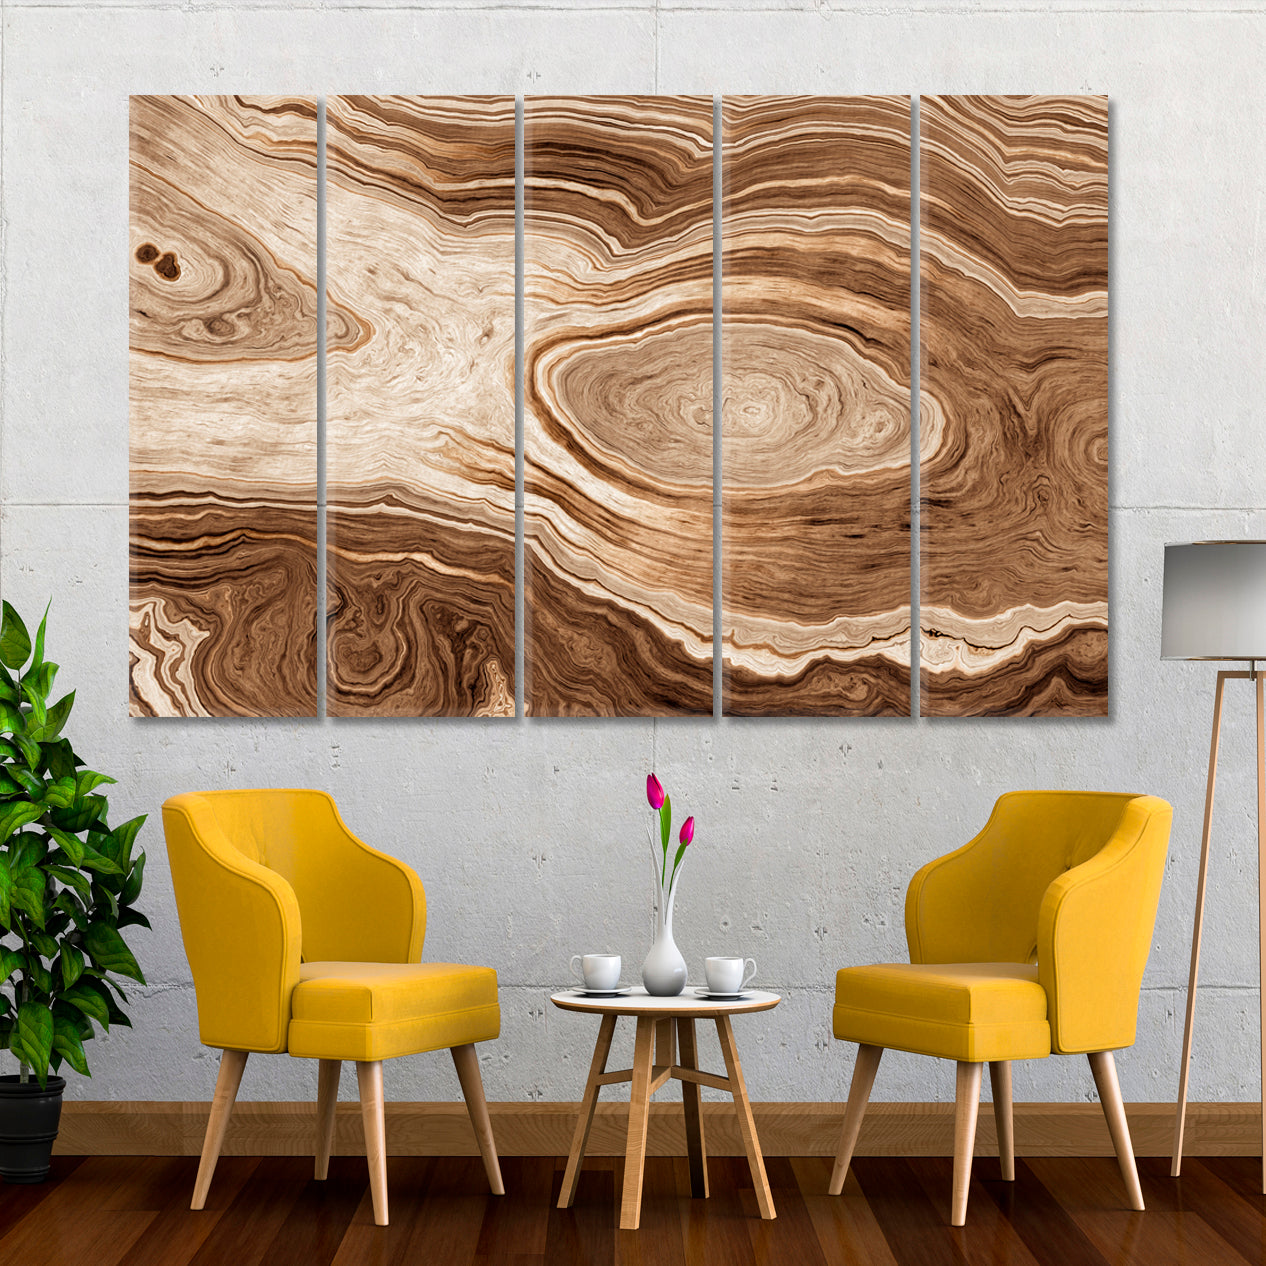 ABSTRACT Wavy Lines Age Growth Rings Oak Big Tree Trunk Slice Cut Woods Abstract Art Print Artesty 5 panels 36" x 24" 